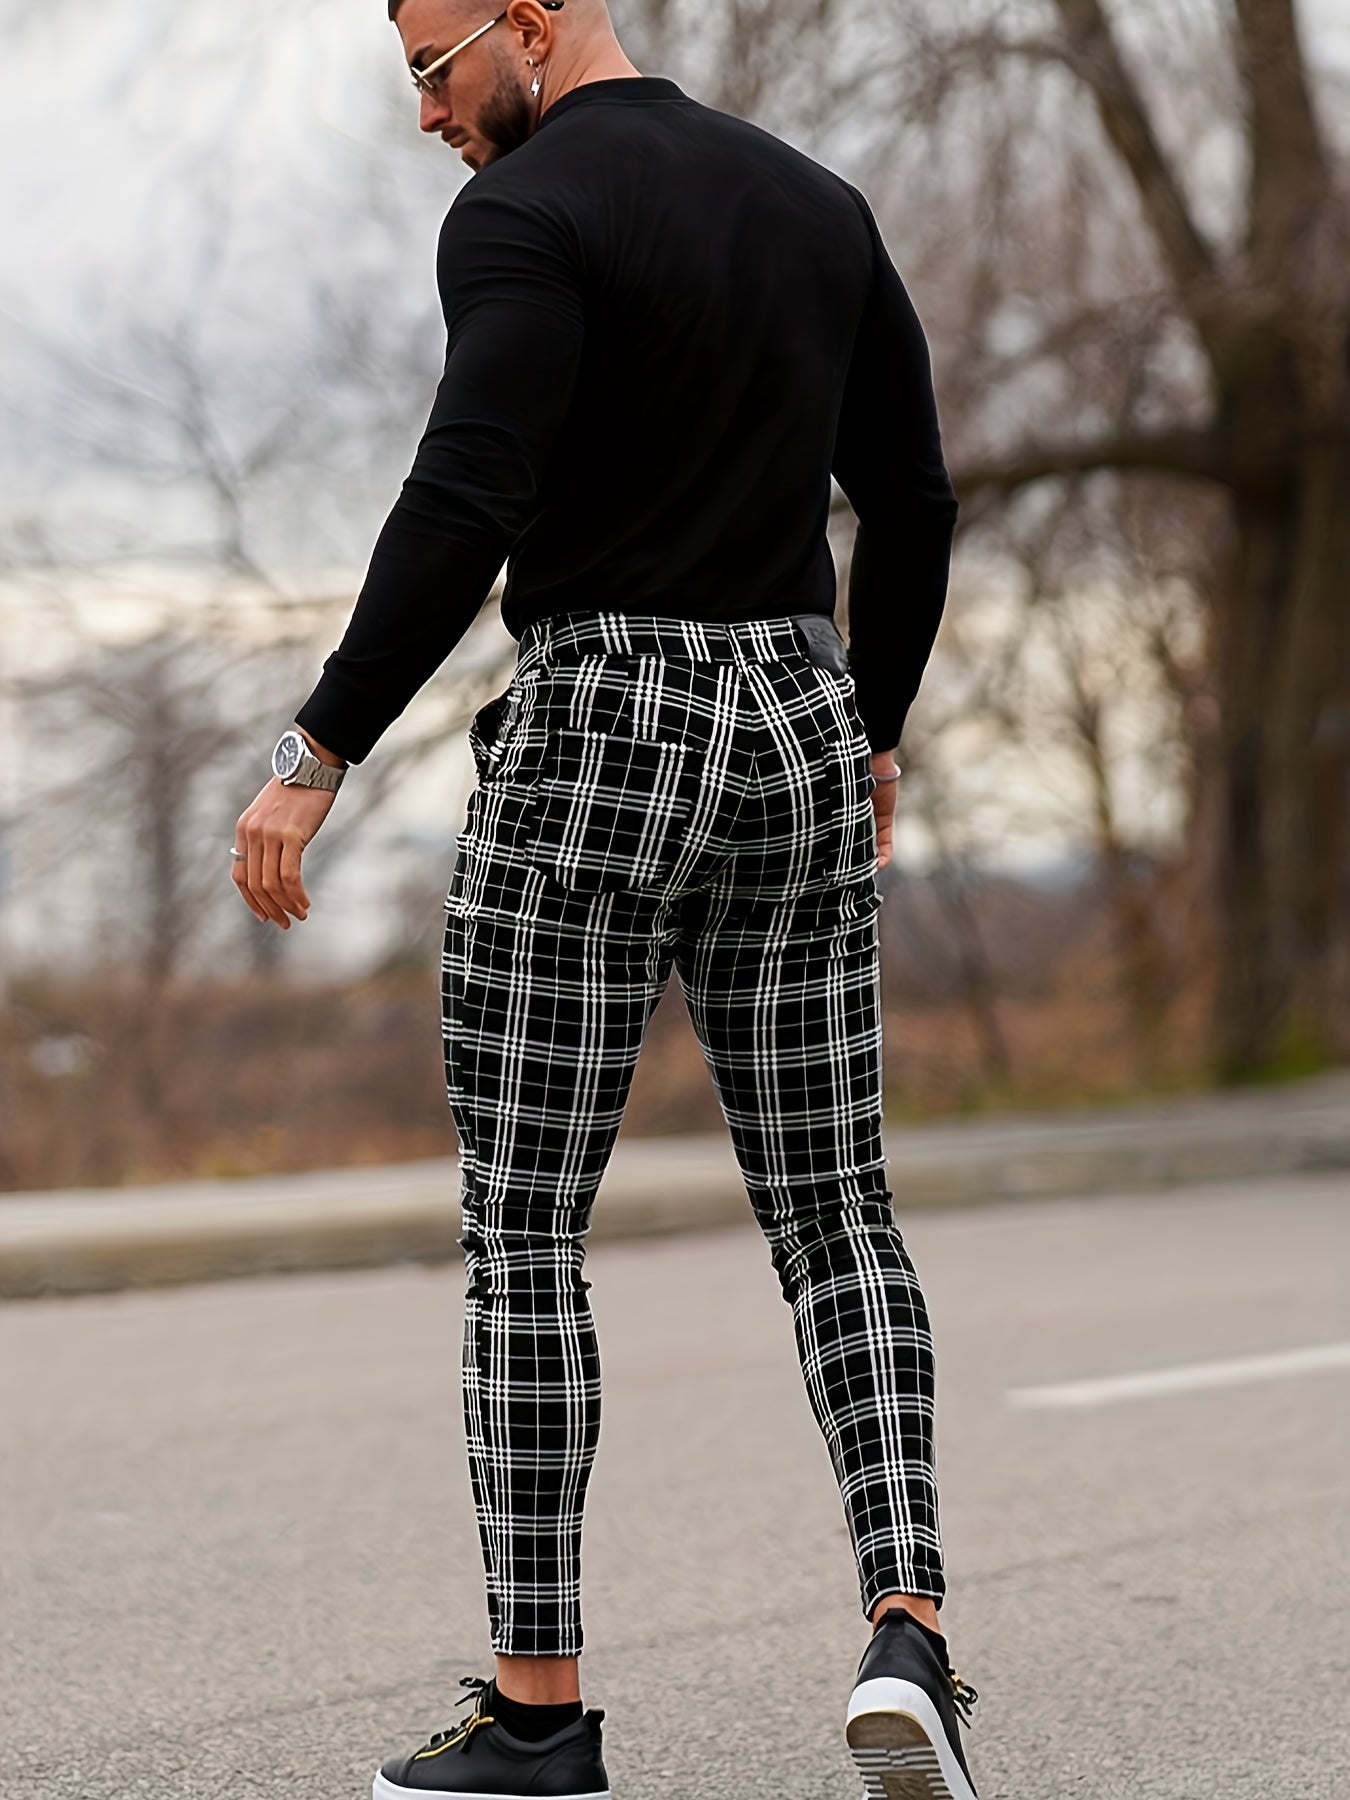 Men's Classic Plaid Casual Tapered Trousers Casual Long Cropped Pants Streetwear For Men